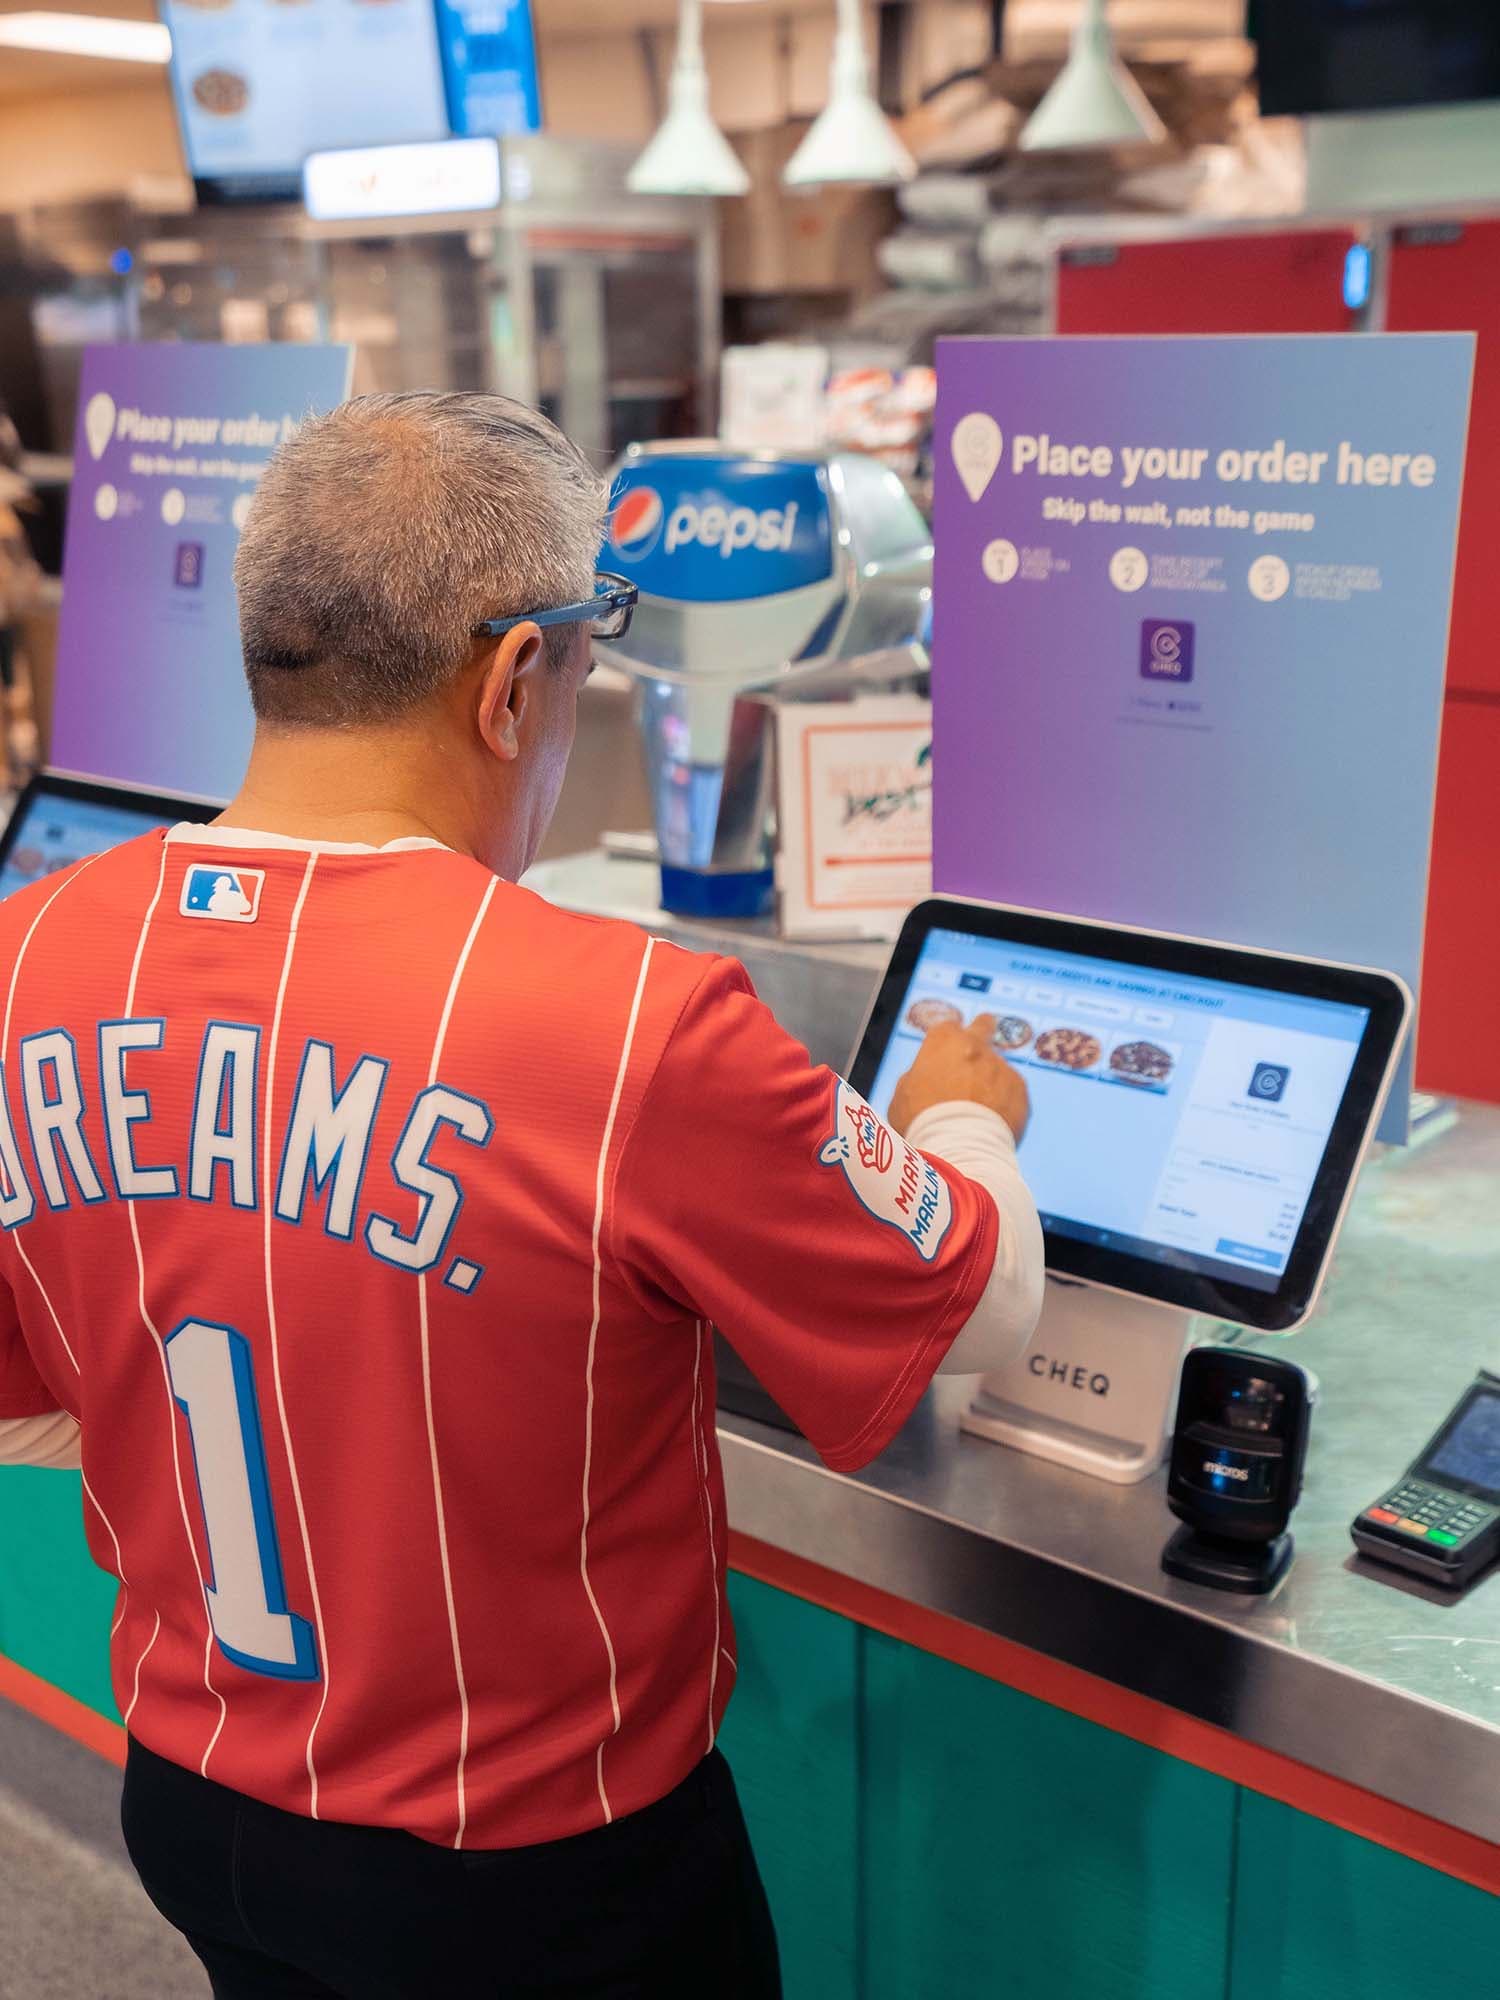 Man with “Dreams. 1” jersey using the CHEQ kiosk.